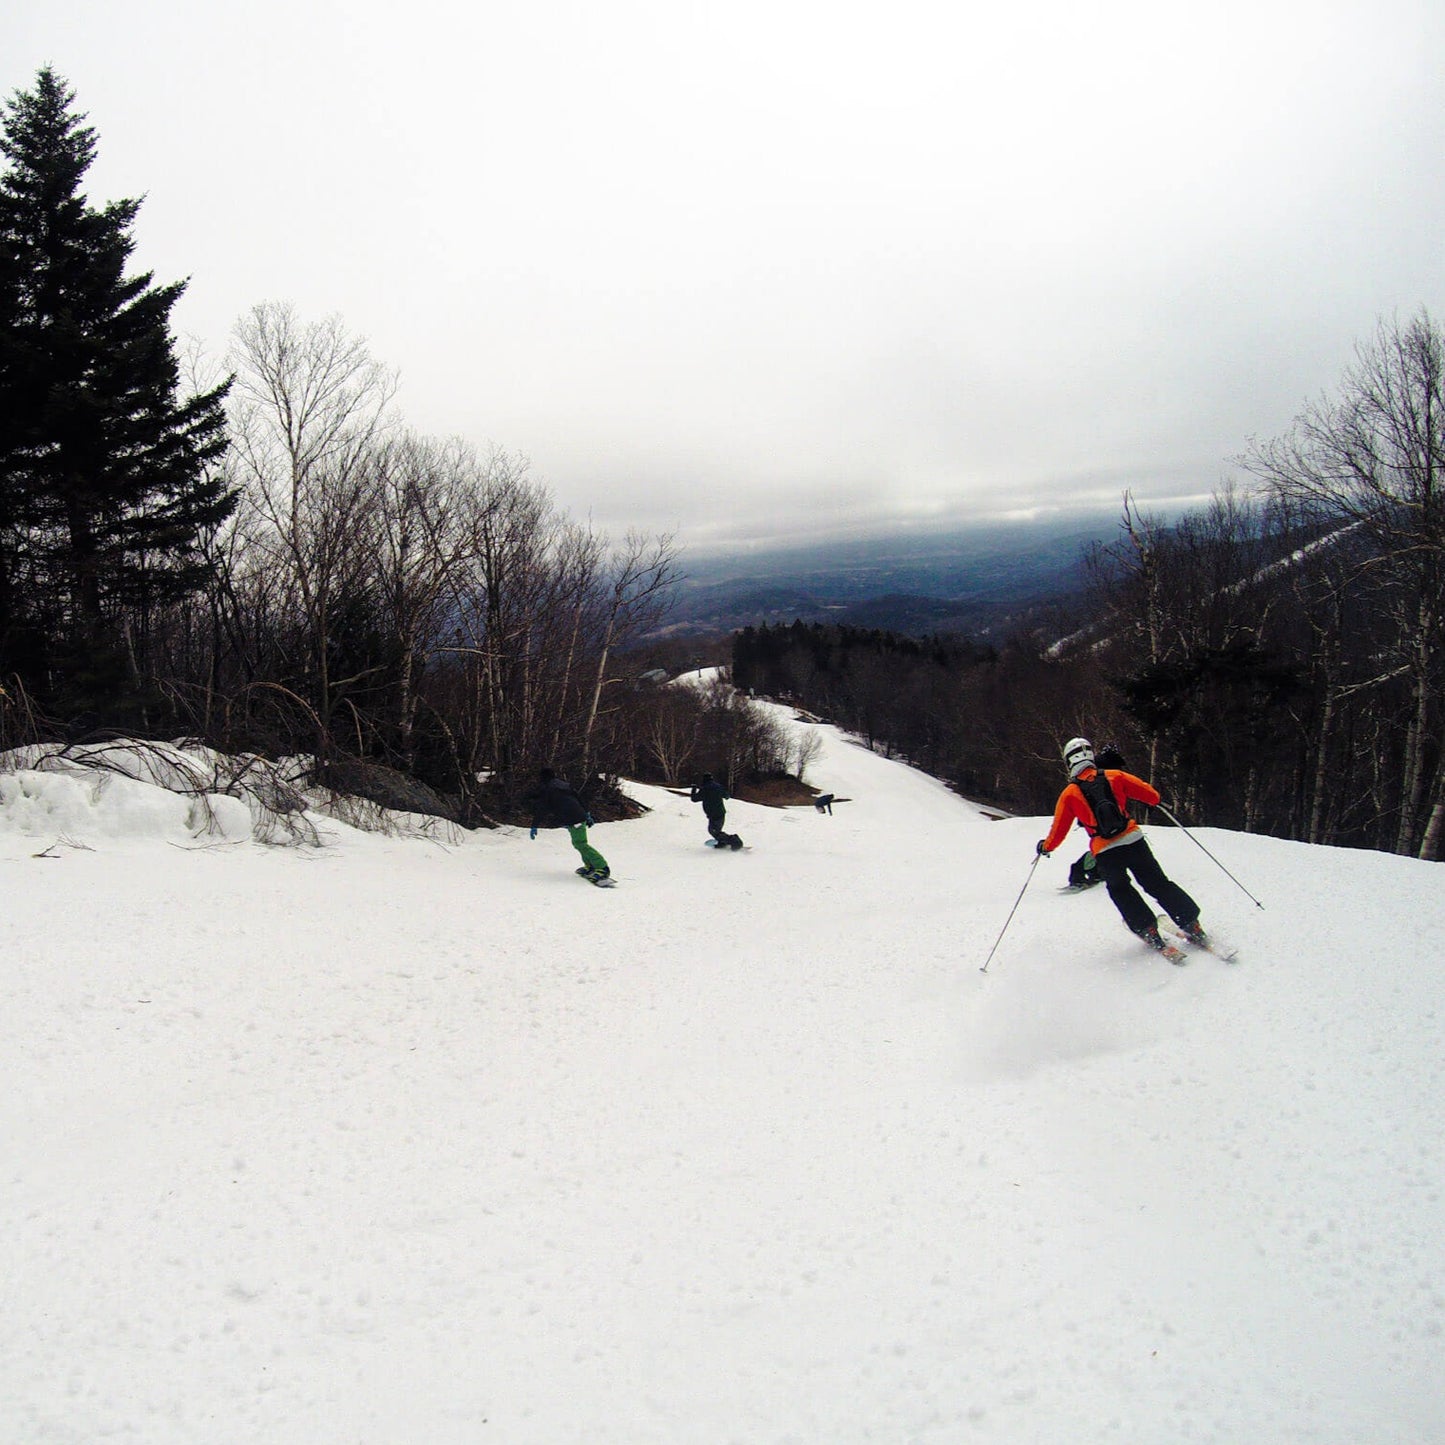 3-Day Jay Peak Wknd Getaway for Snowboarding & Skiing (All Levels)